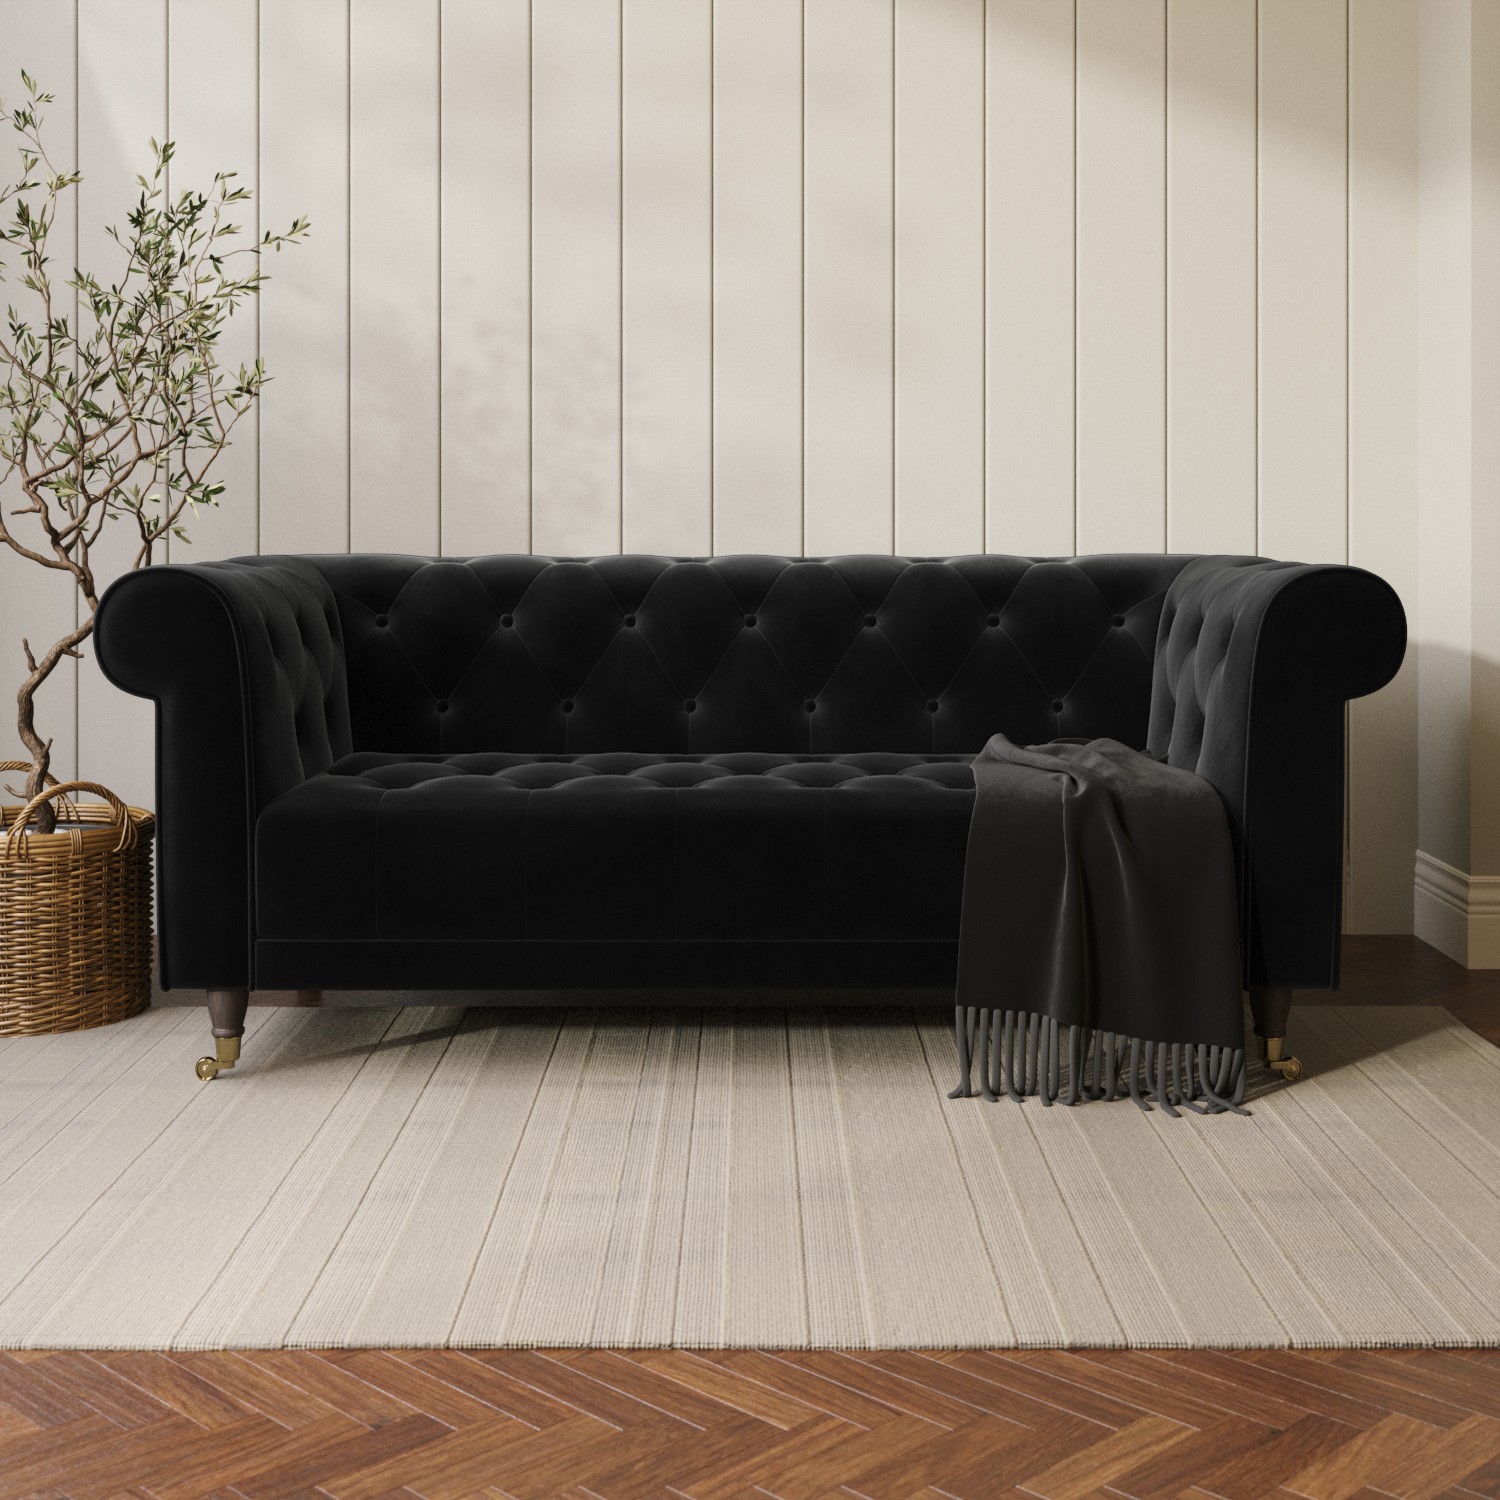 Read more about Dark grey velvet chesterfield sofa seats 3 ophelia